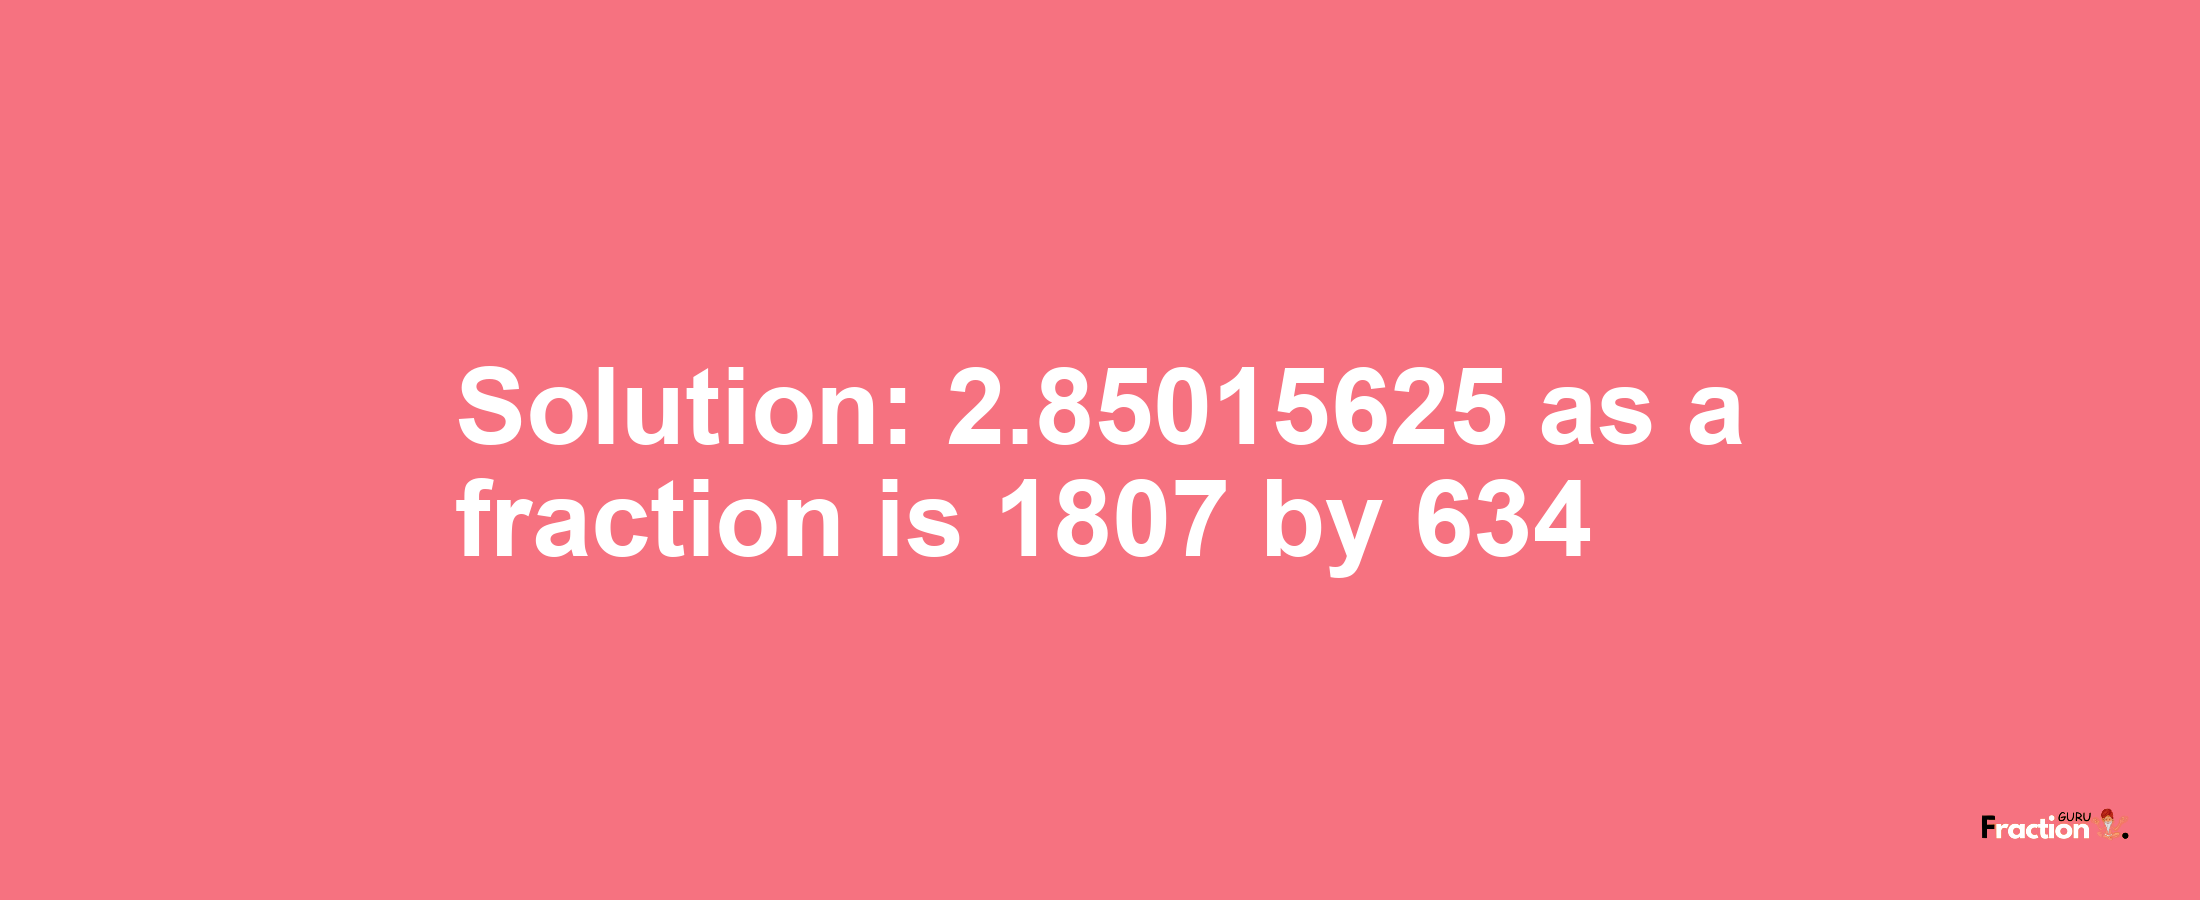 Solution:2.85015625 as a fraction is 1807/634